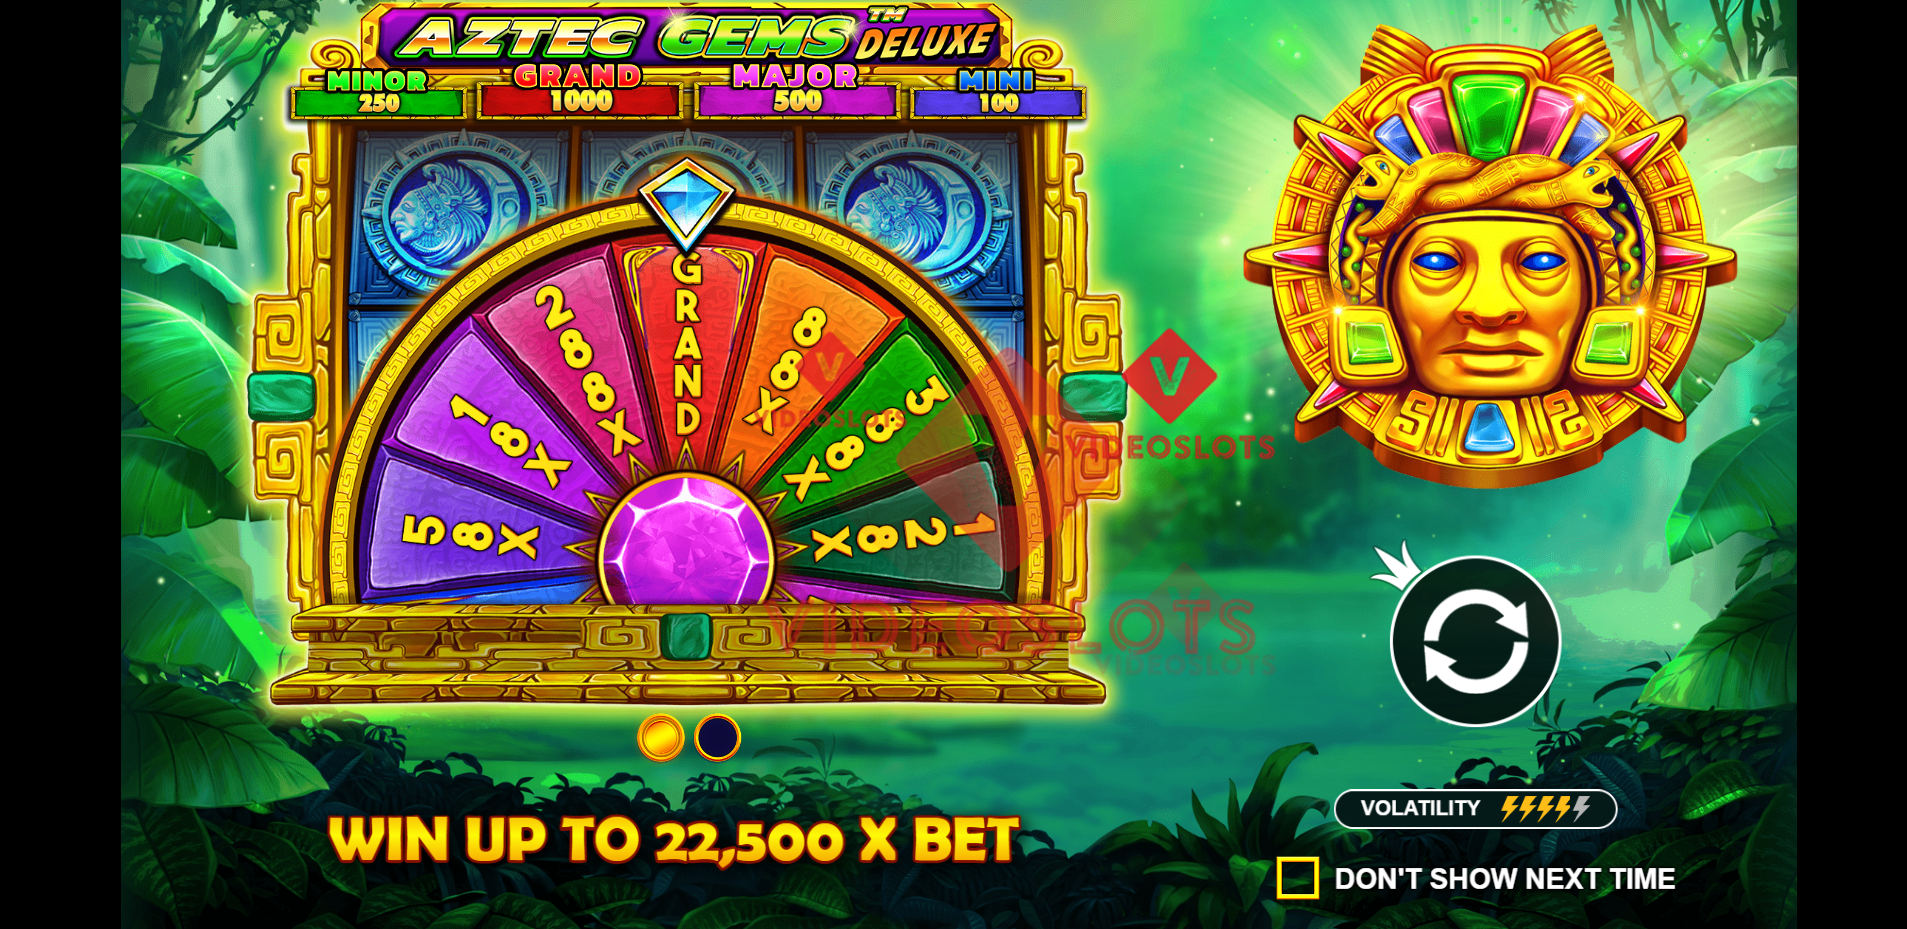 Game Intro for Aztec Gems Deluxe slot by Pragmatic Play